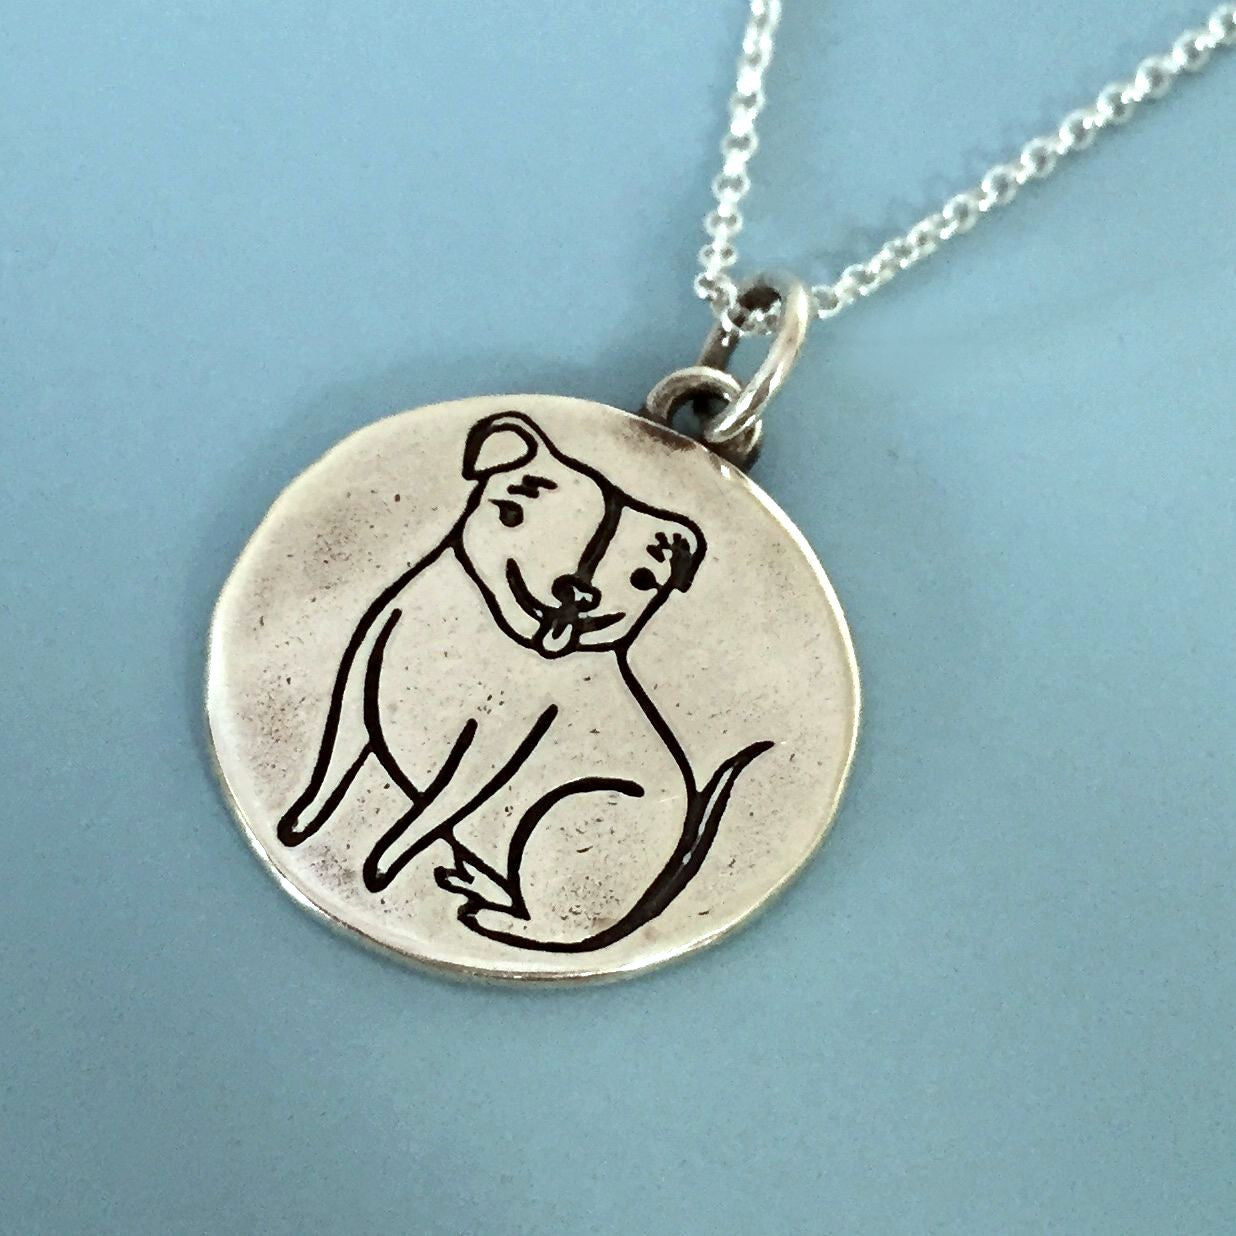 The Happy Rescued Pit Bull Necklace in Sterling Silver - Custom Stamped with Dog's Name and Date